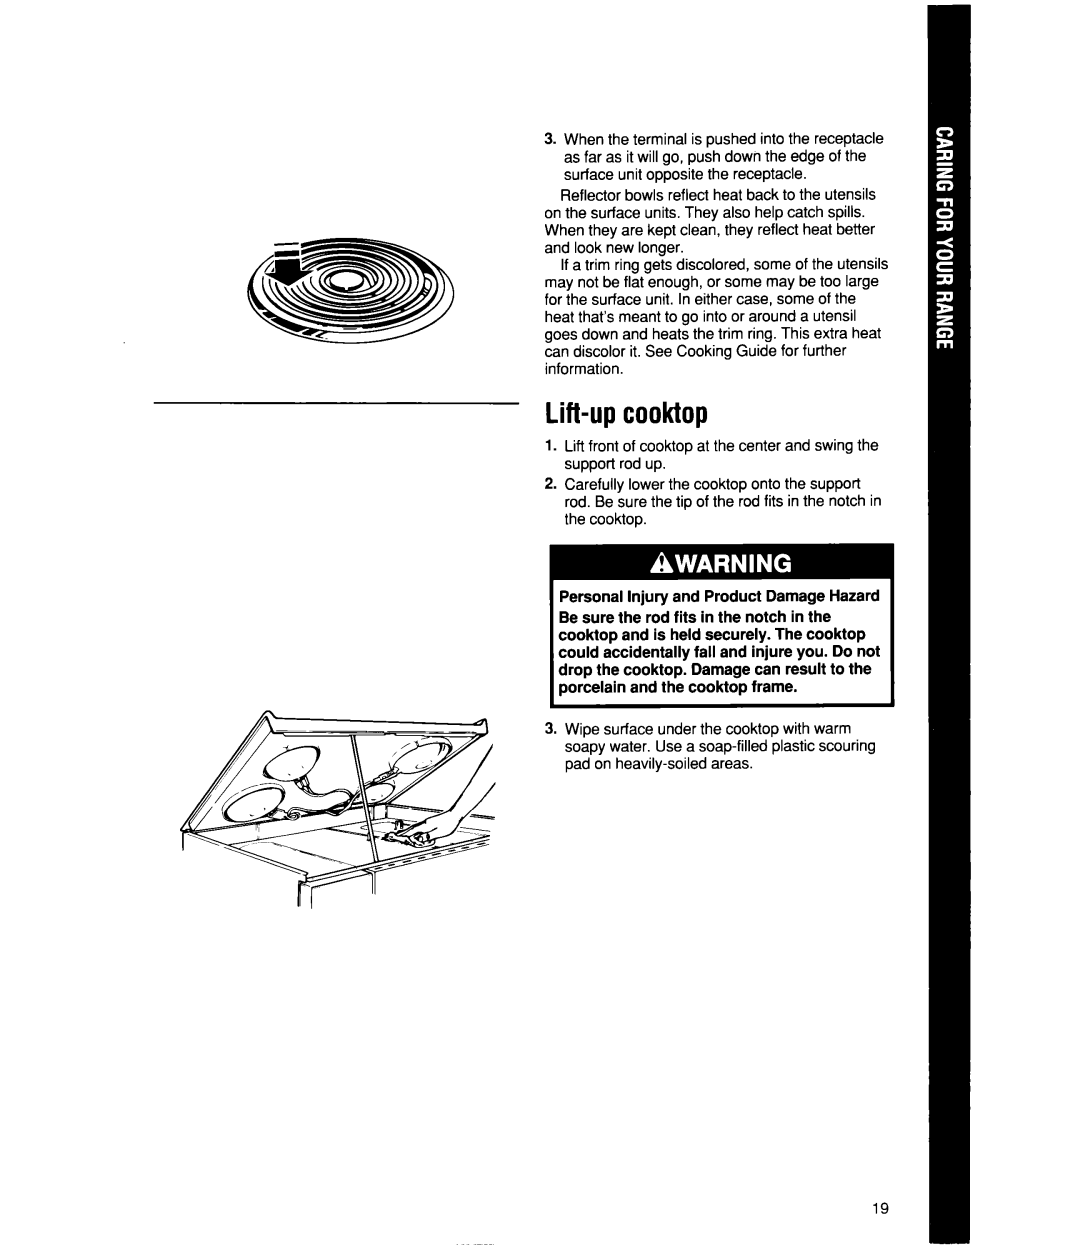 Whirlpool RF4700XW manual Lift-upcooktop, Personal Injury and Product Damage Hazard 